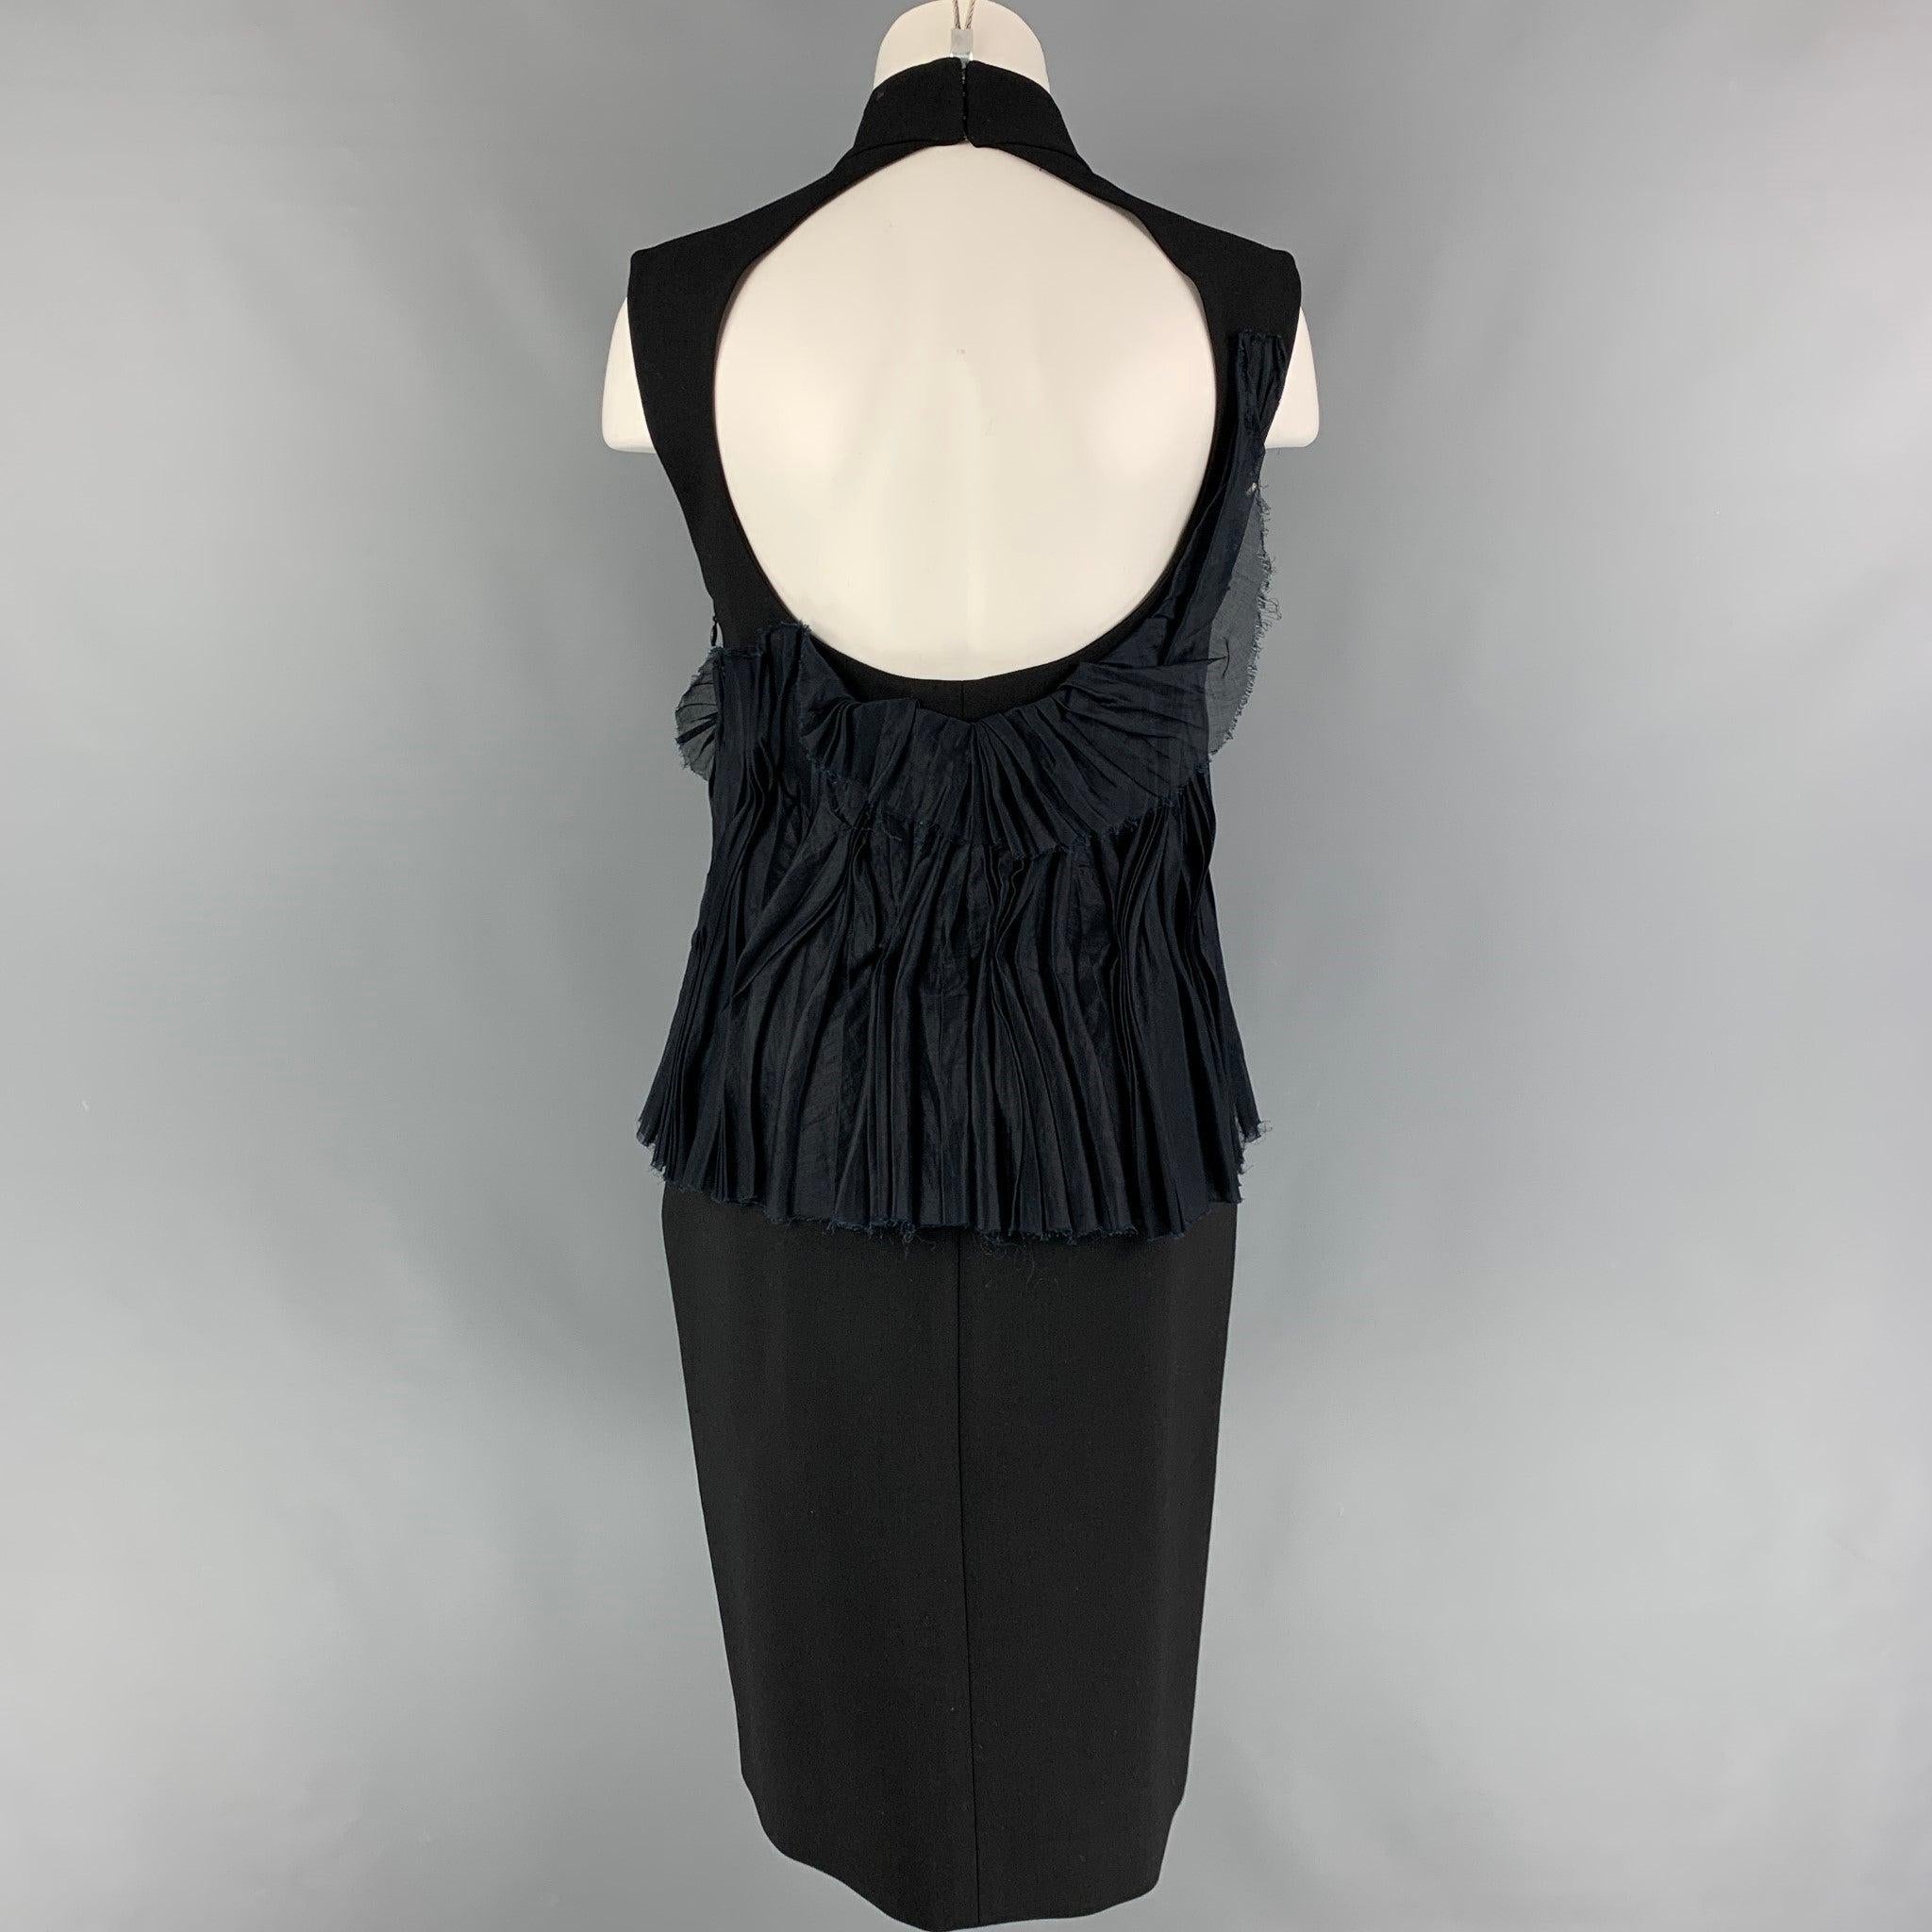 BRIONI Size L Black Mercerized Cotton Ruffled Open Back Cocktail Dress In Good Condition For Sale In San Francisco, CA